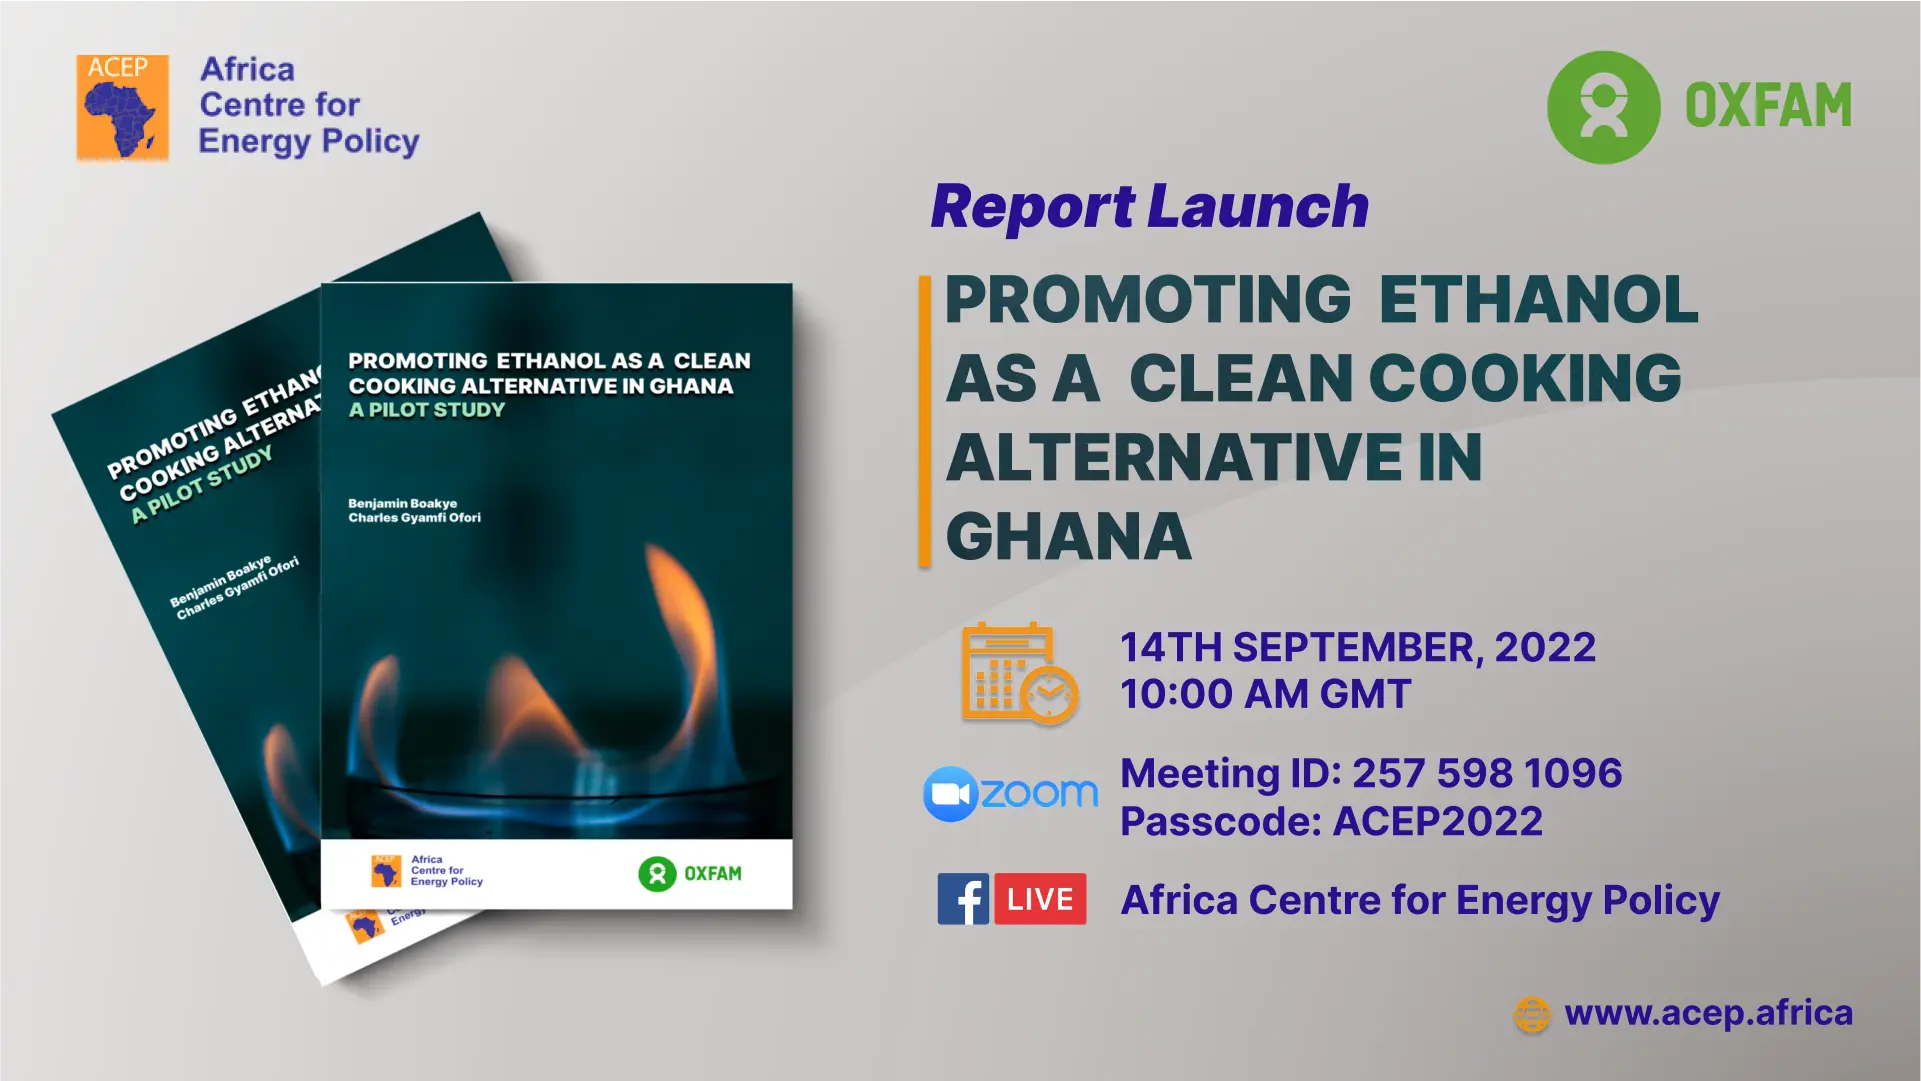 Report Launch: PROMOTING ETHANOL AS A CLEAN COOKING ALTERNATIVE IN GHANA